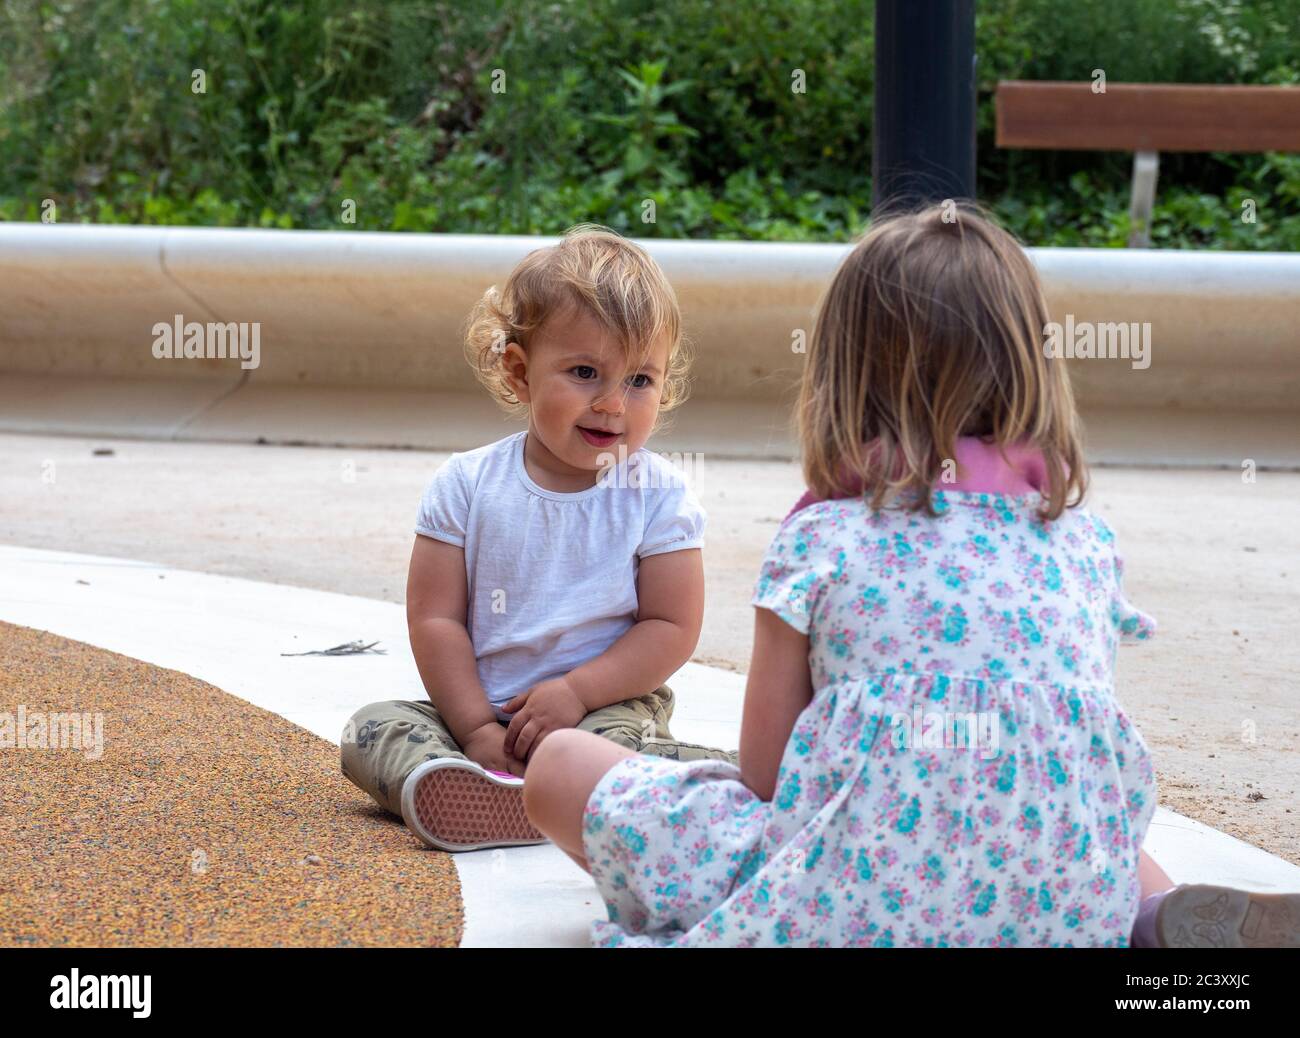 baby girl sitting with an older girl  Stock Photo